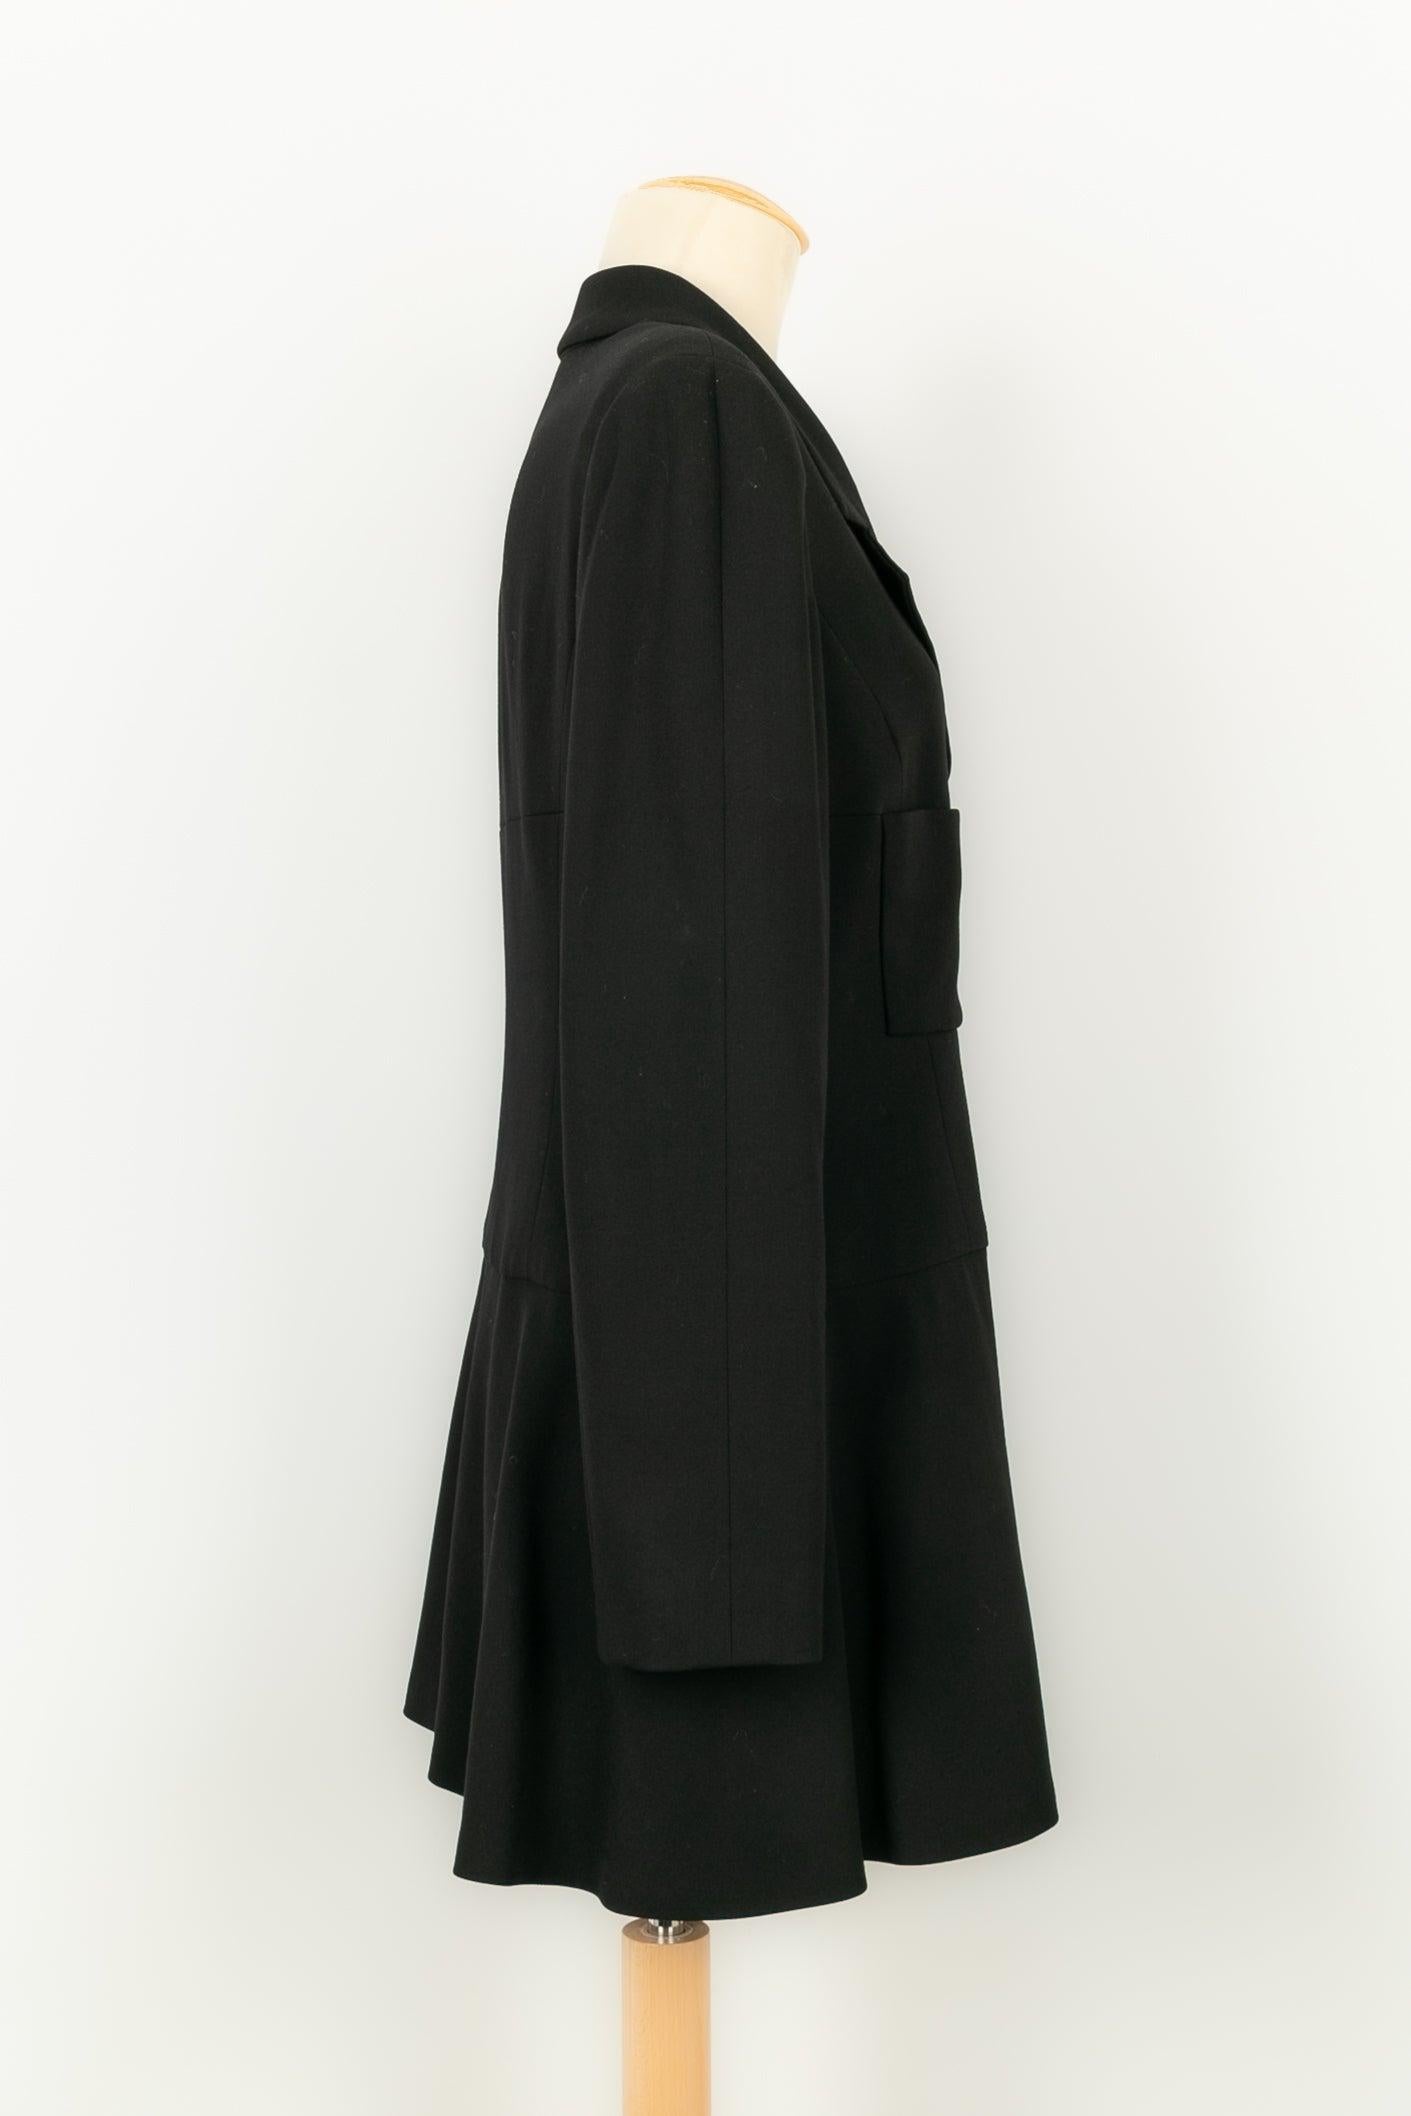 Chanel Suit Set of Jacket and Pants in Black Wool, 1997 For Sale 2